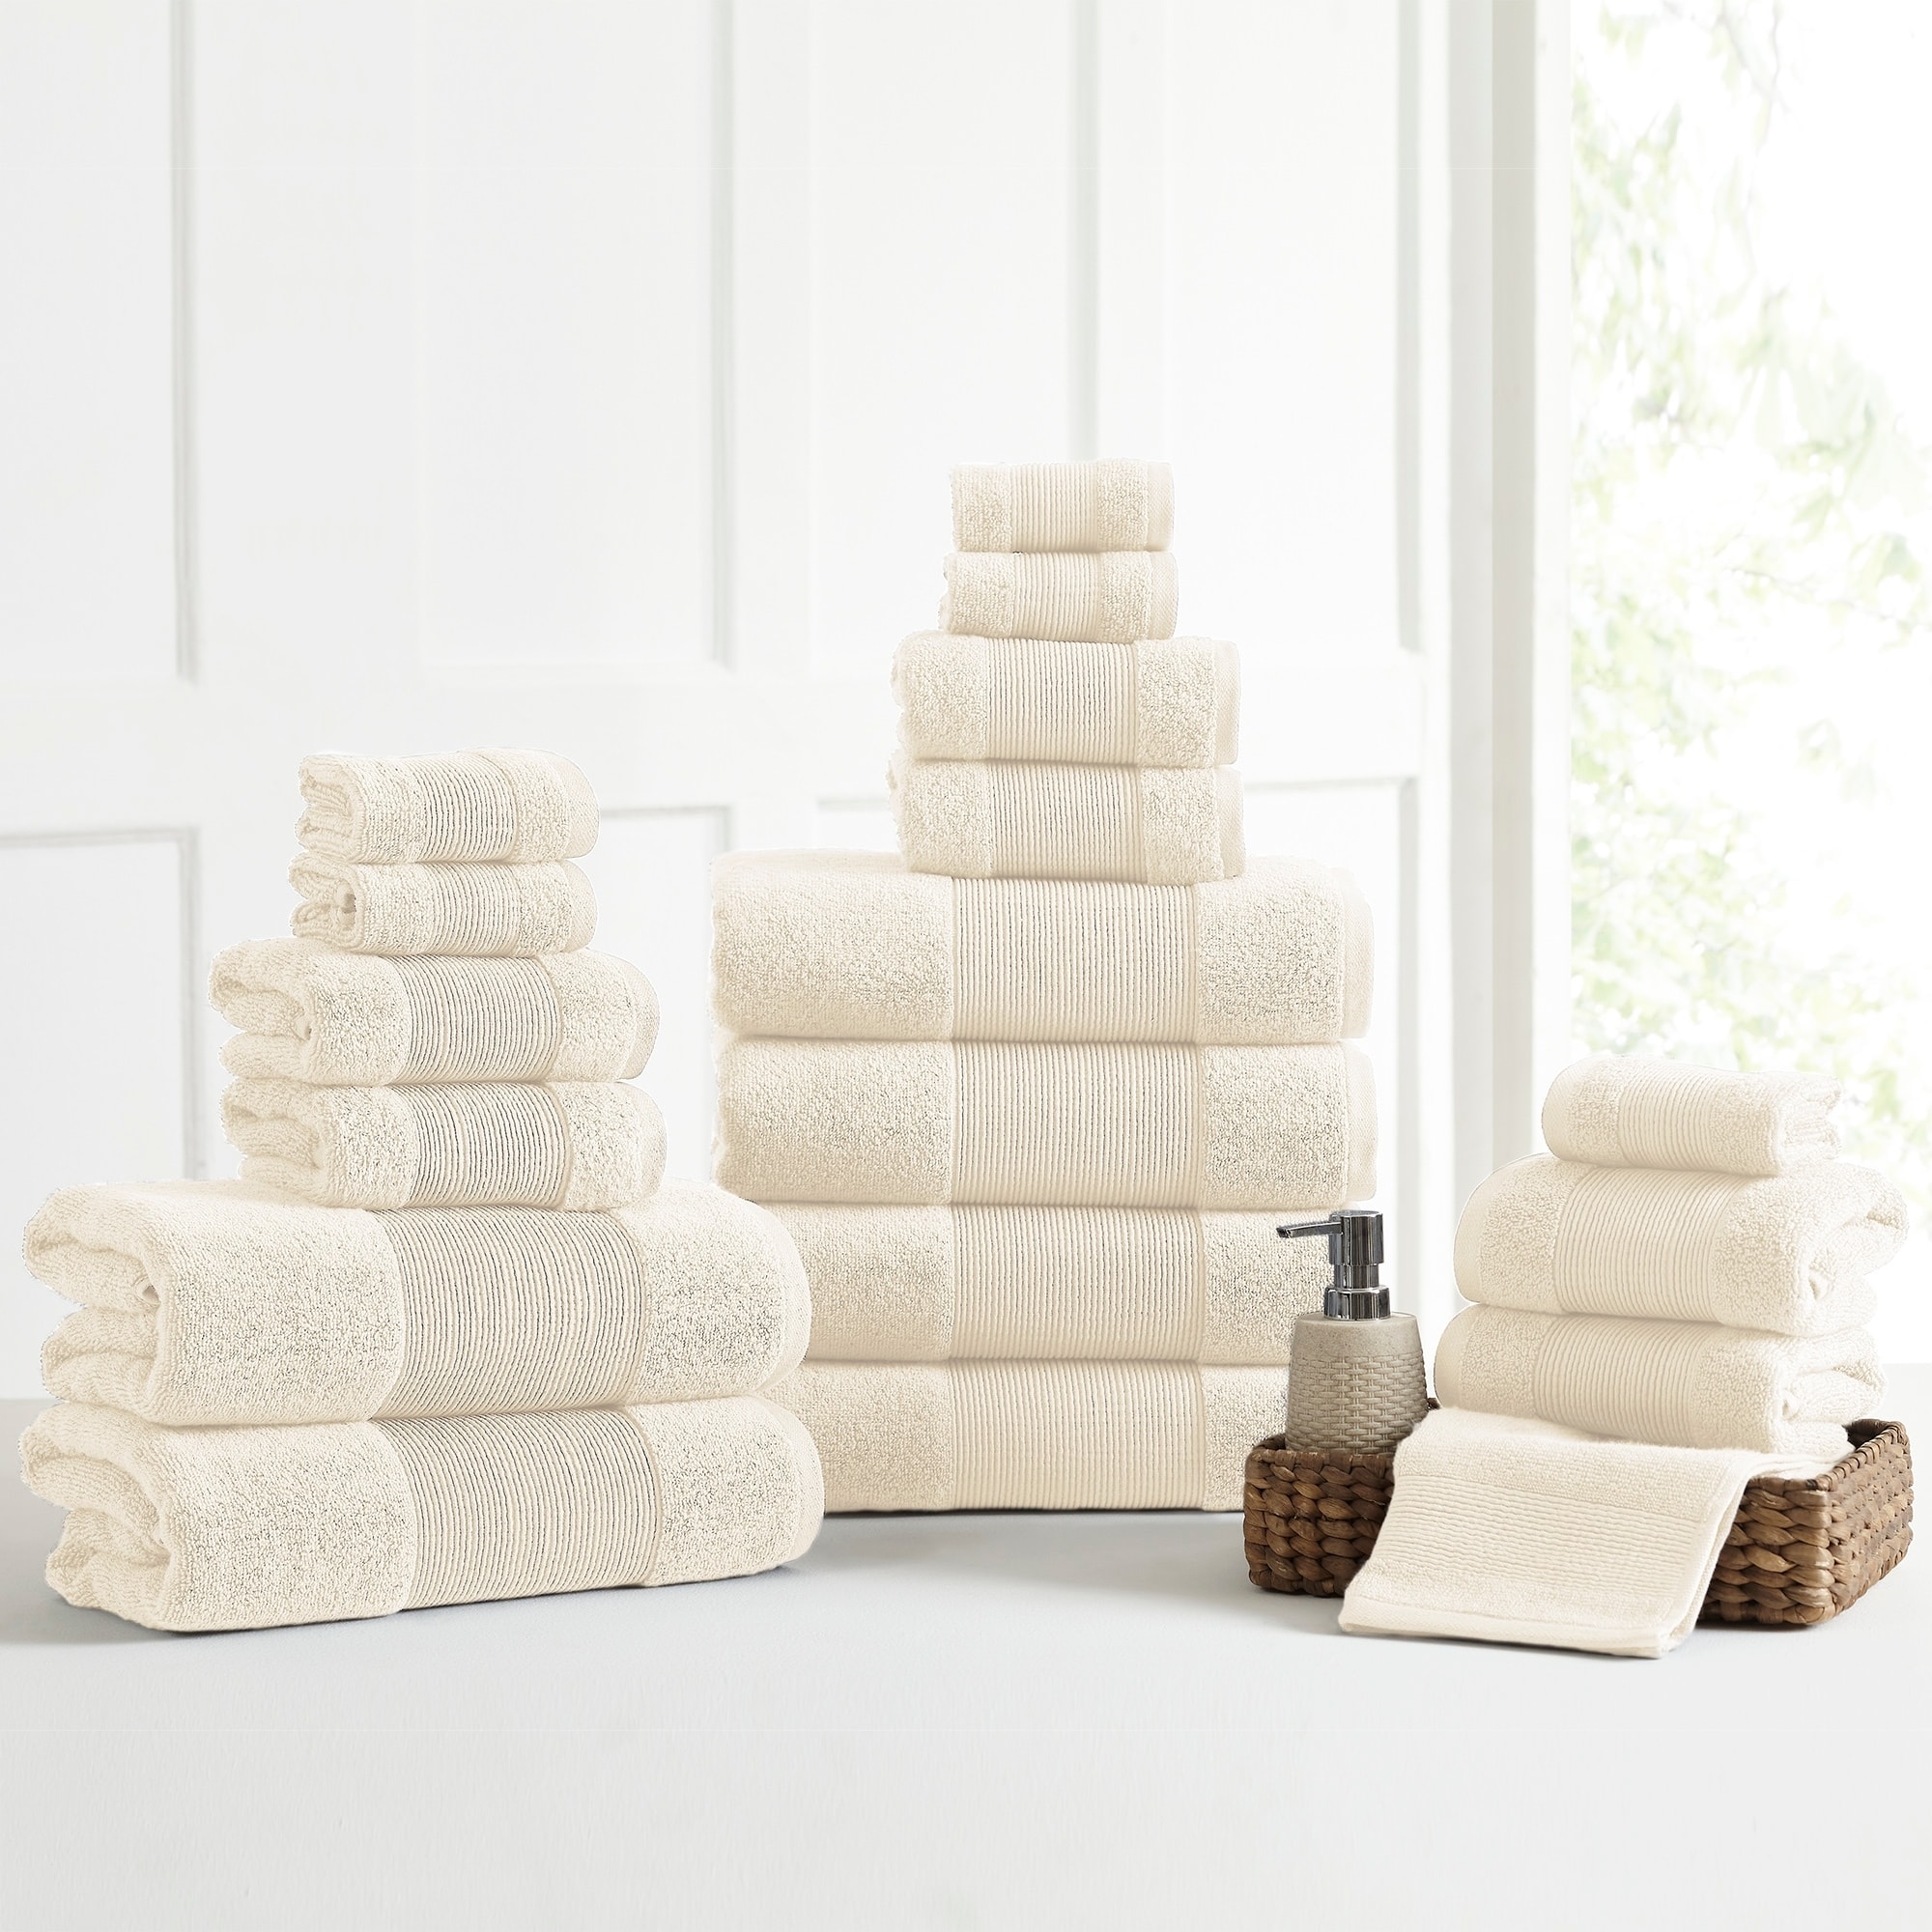 Utopia Towels 8-Piece Premium Towel Set,2 Bath Towels 24 x 54 Inches, 2  Hand Towels 16 x 28 Inches, and 4 WashCloths 13 x 13 Inches, 600 GSM 100%  Ring Spun Cotton Highly Absorbent Towels for Bathroom 